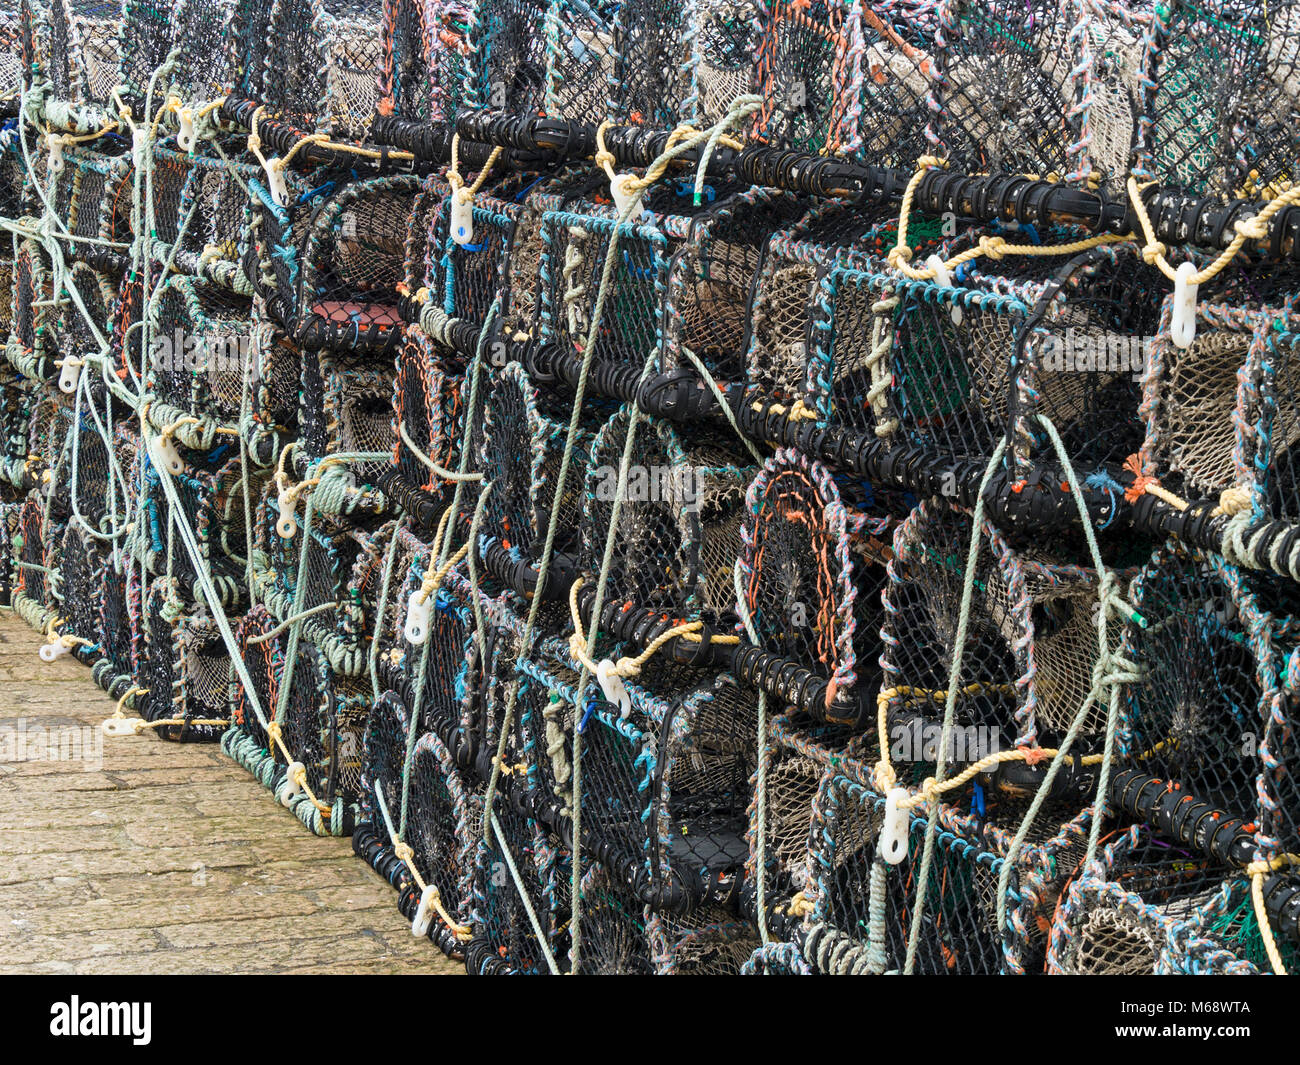 Stack of lobster and crab fishing pot cages creels, St. Ives, Cornwall, England, UK Stock Photo